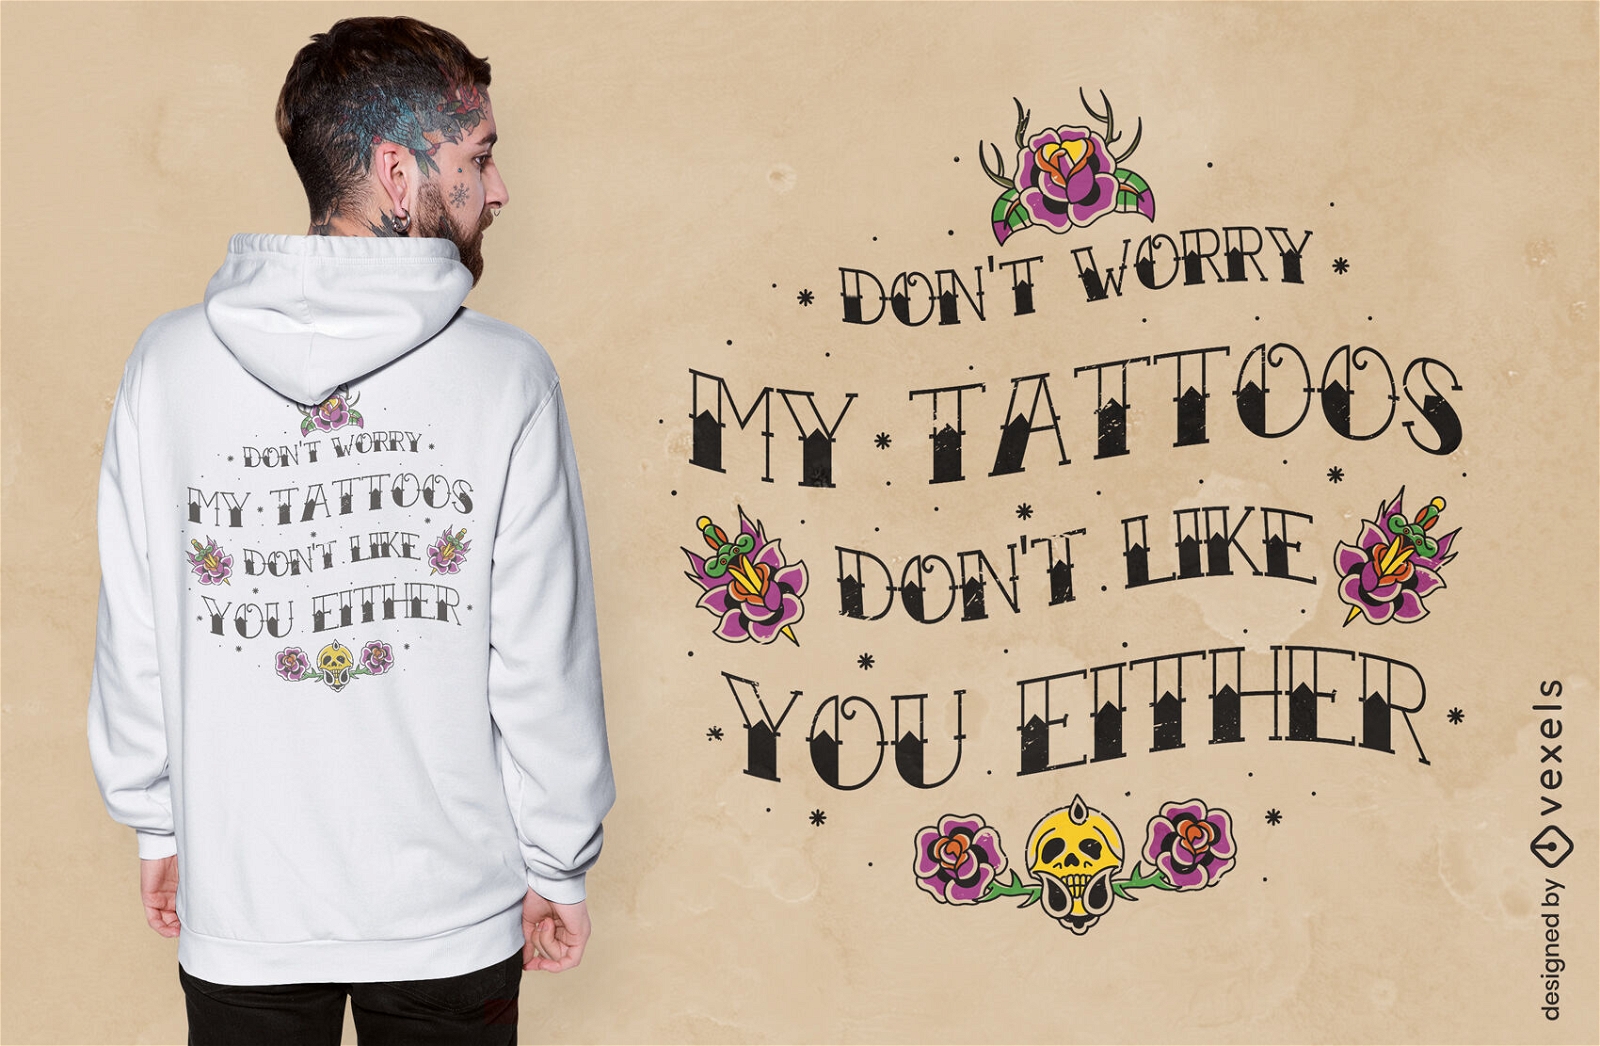 Tattoos funny quote t-shirt design